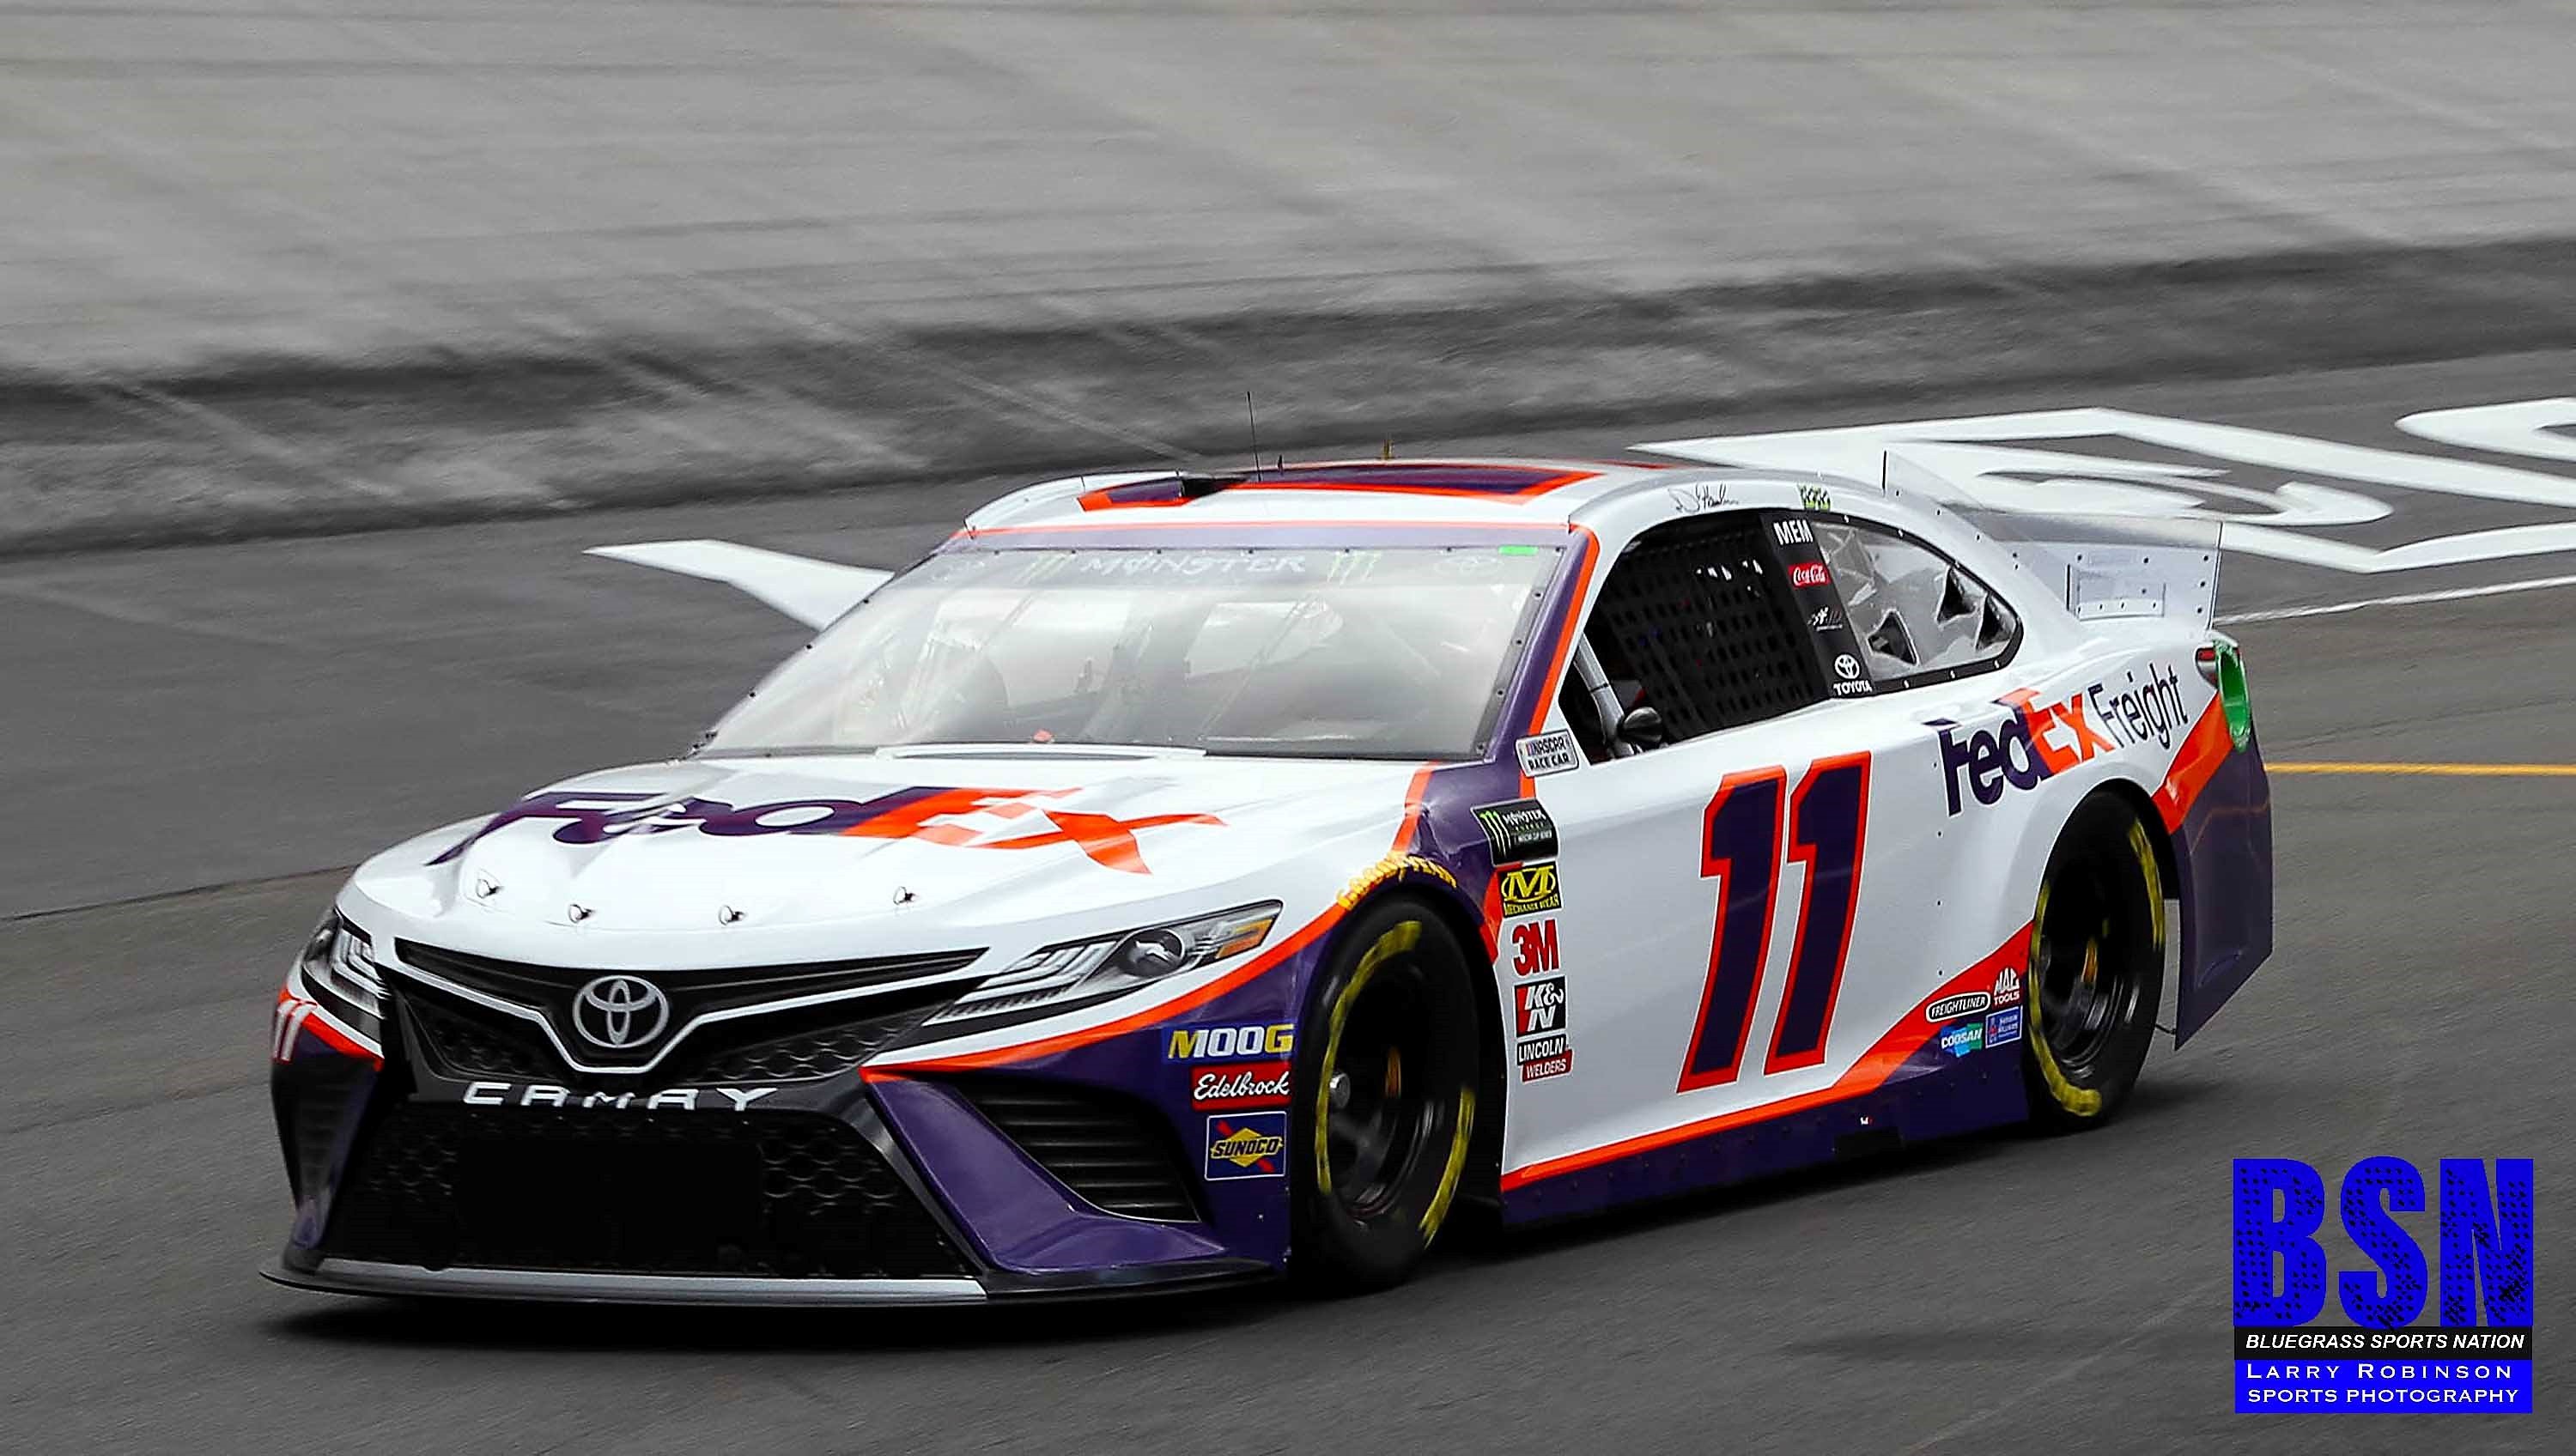 Hamlin with the Win at Homestead iRacing!! Bluegrass Sports Nation